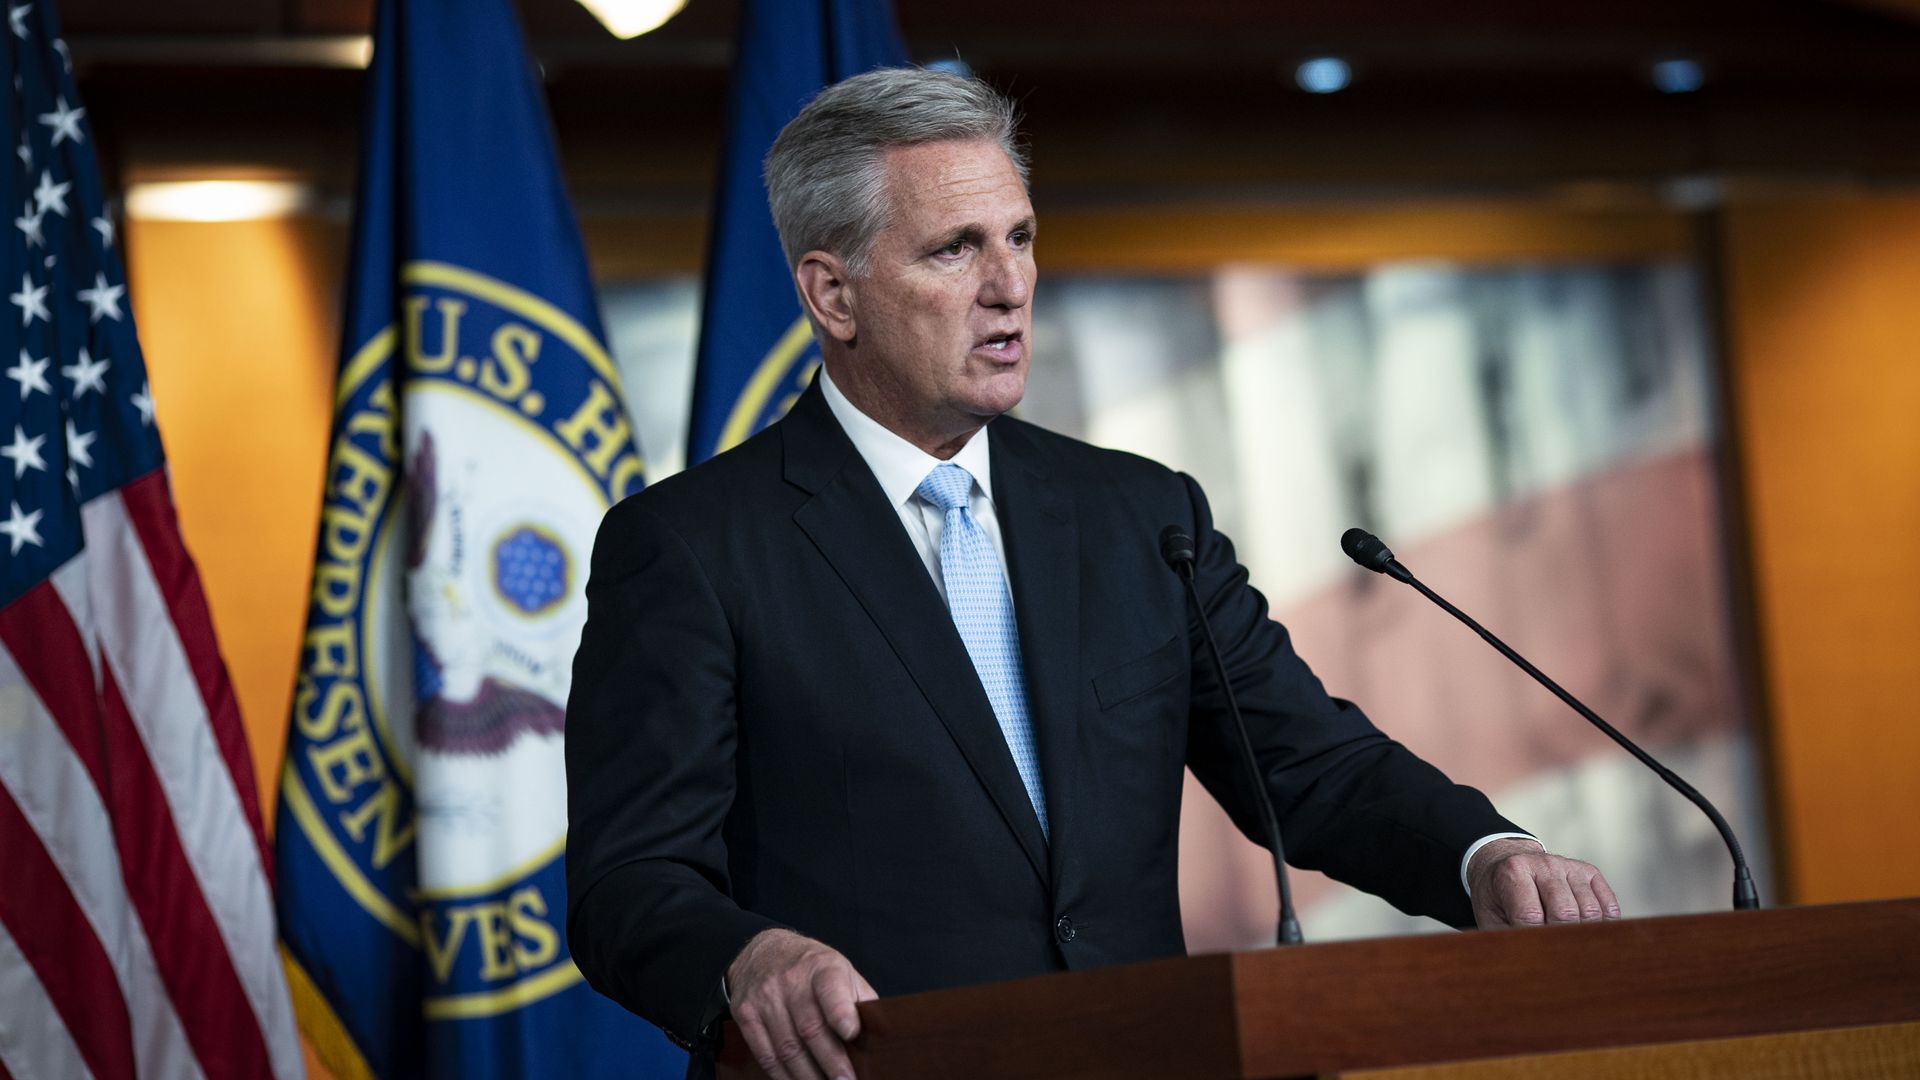 House Minority Leader Kevin McCarthy, a Republican from California, speaks during a news conference at the U.S. Capitol in Washington, D.C., U.S., on Friday, Aug. 27, 2021. 